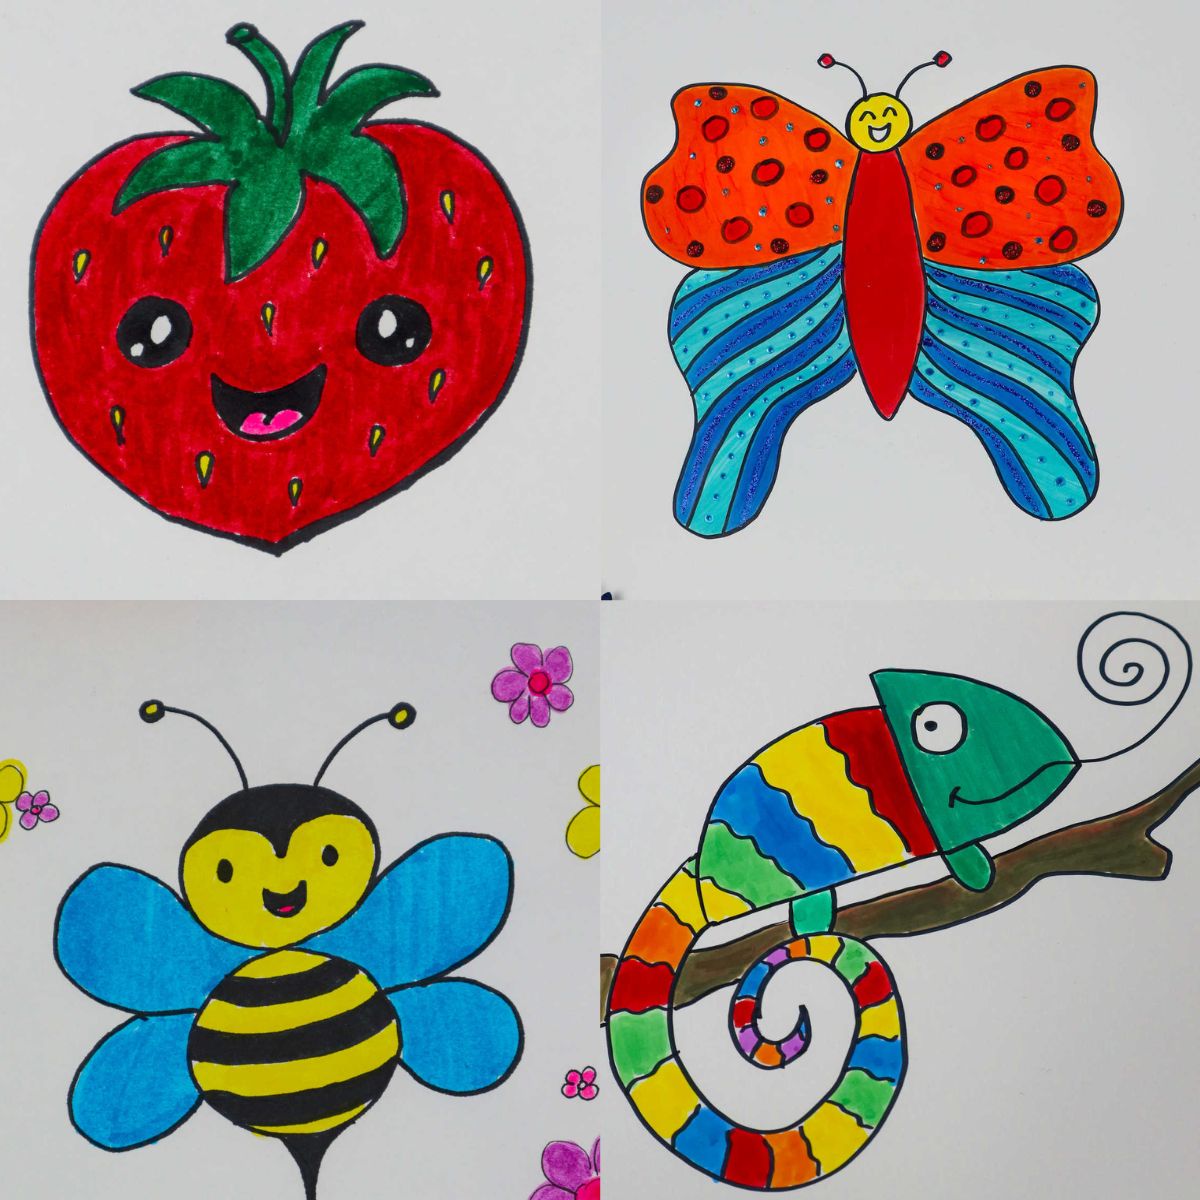 40 Easy Drawing Ideas for Kids - Craftsy Hacks